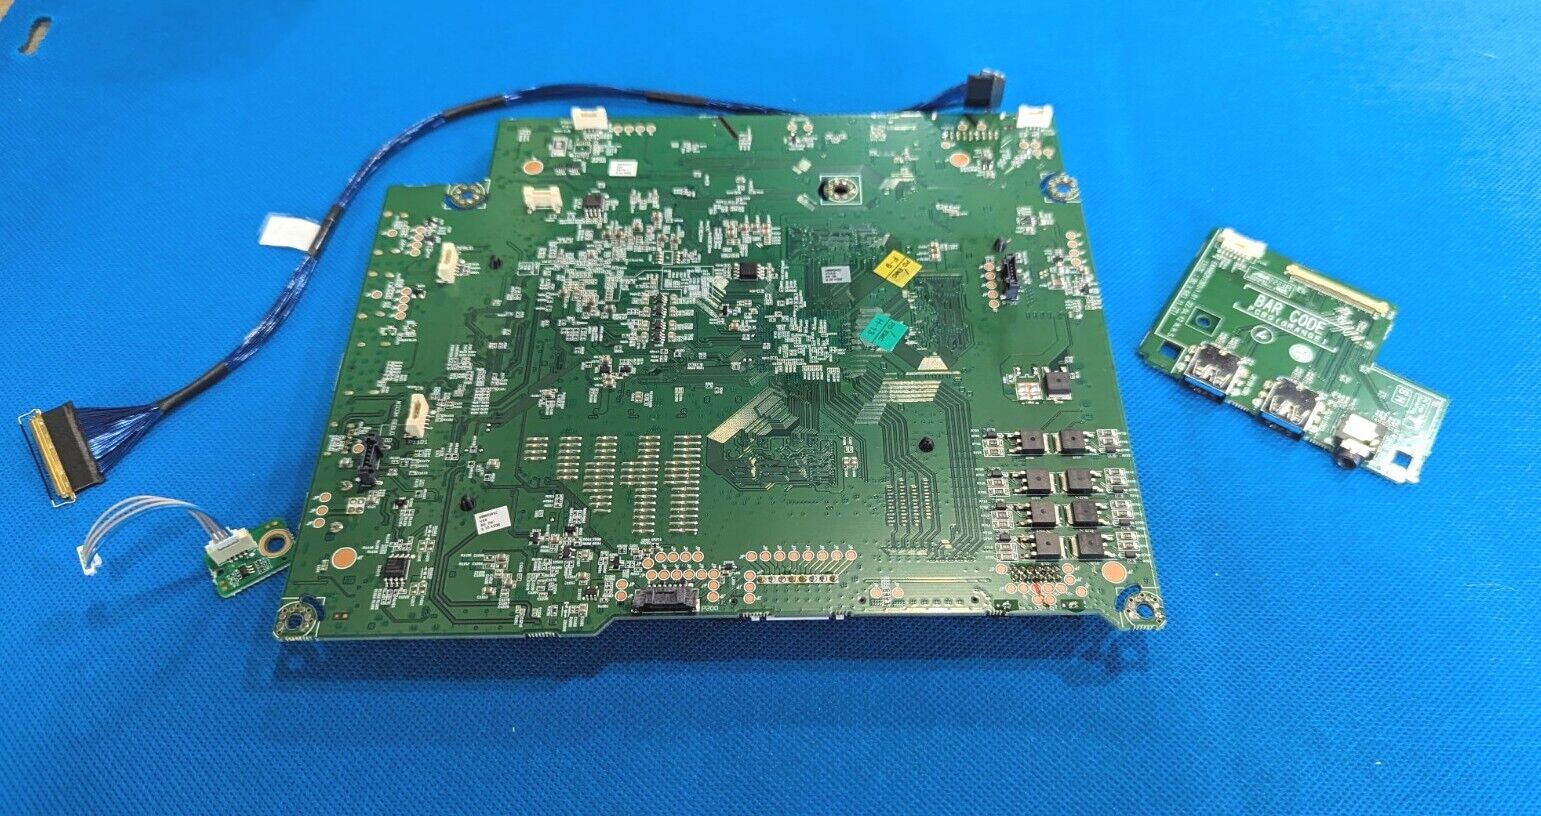 LG Power Main Board For 49WQ95C Monitor. Out Of Cracked Screen Monitor 